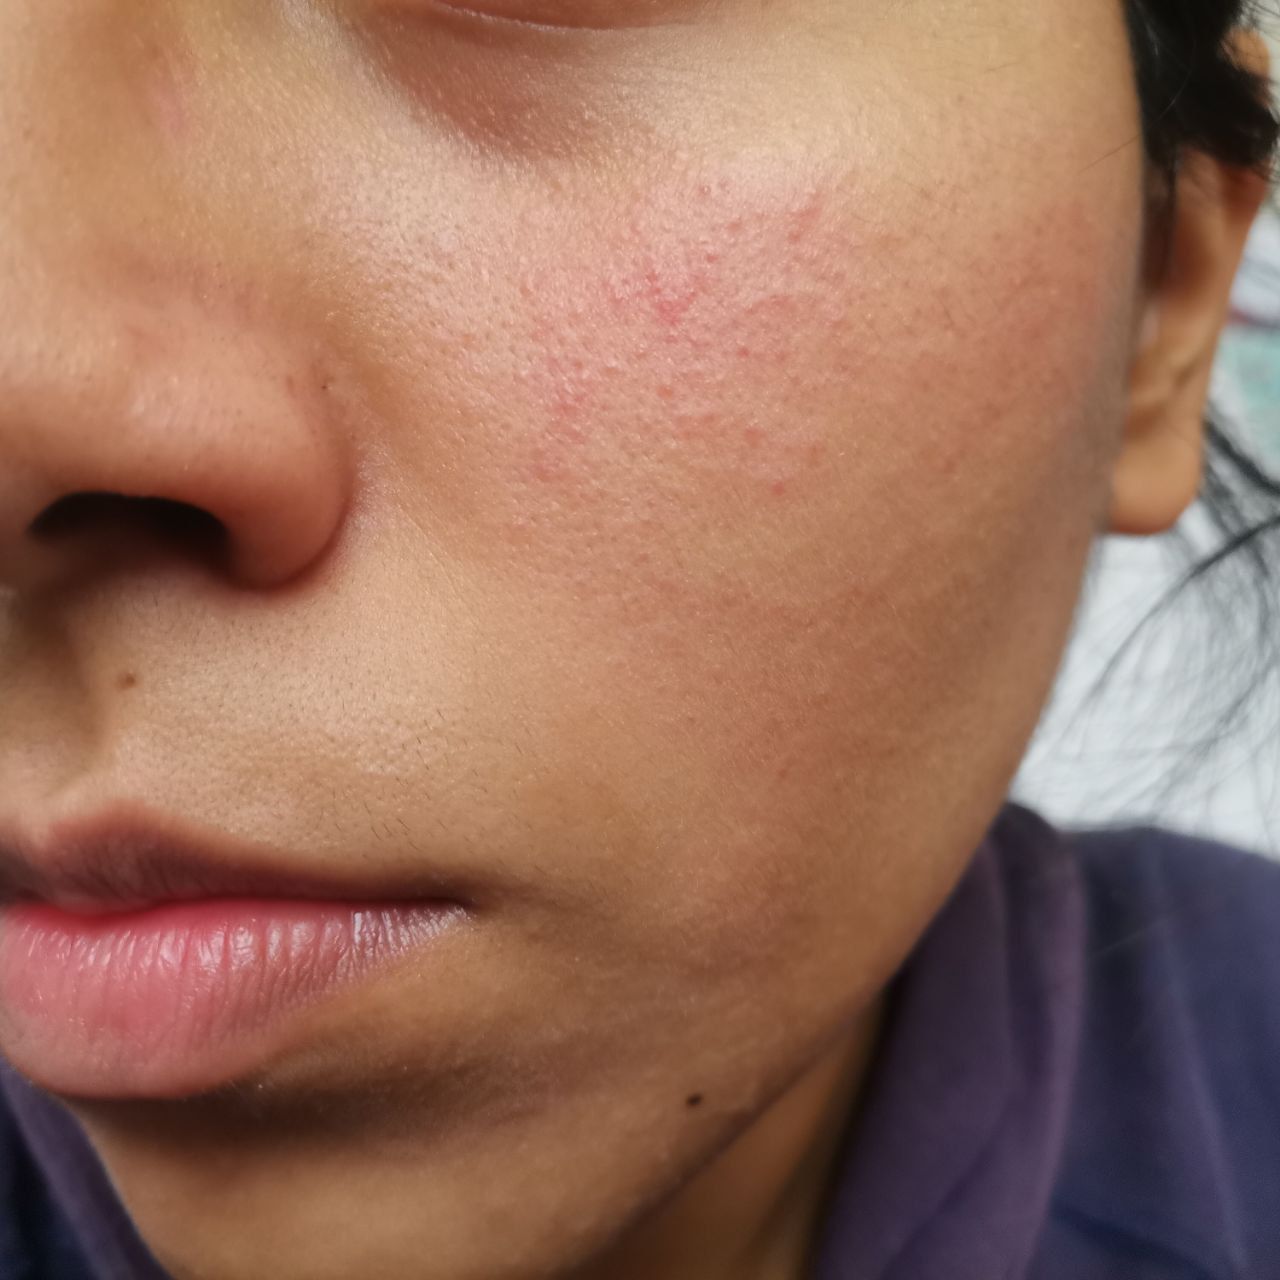 HI. I NEED HELP W THIS. ID IF ITS FUNGAL ACNE, CLOSED COMEDOONES OR ROSACEA  !!! derms not helping